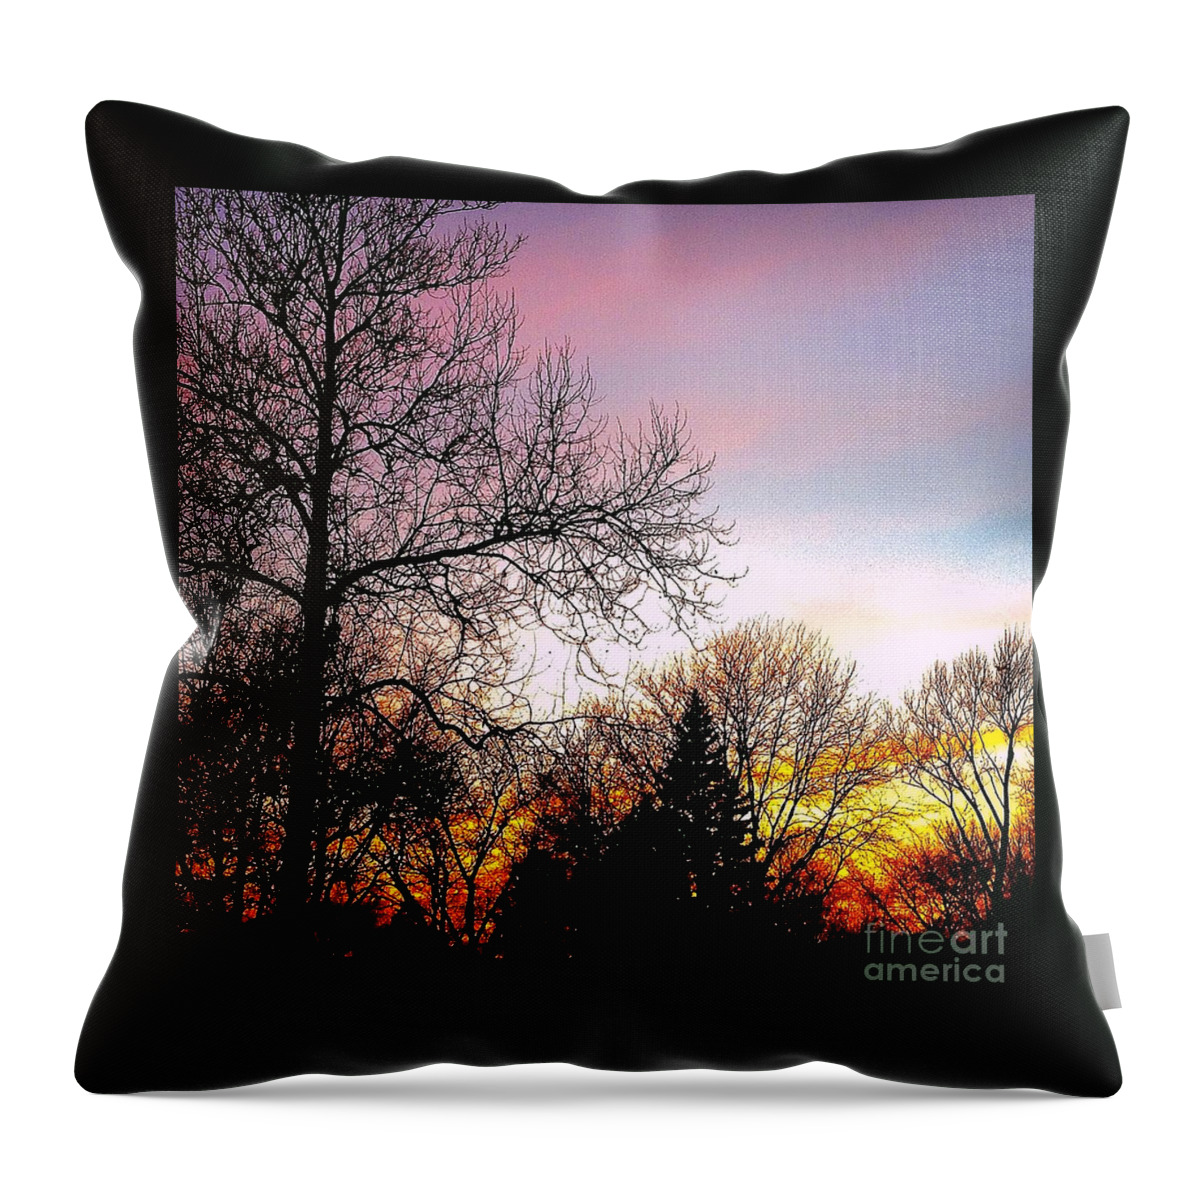 Frank J Casella Throw Pillow featuring the photograph Yesterday's Sky by Frank J Casella